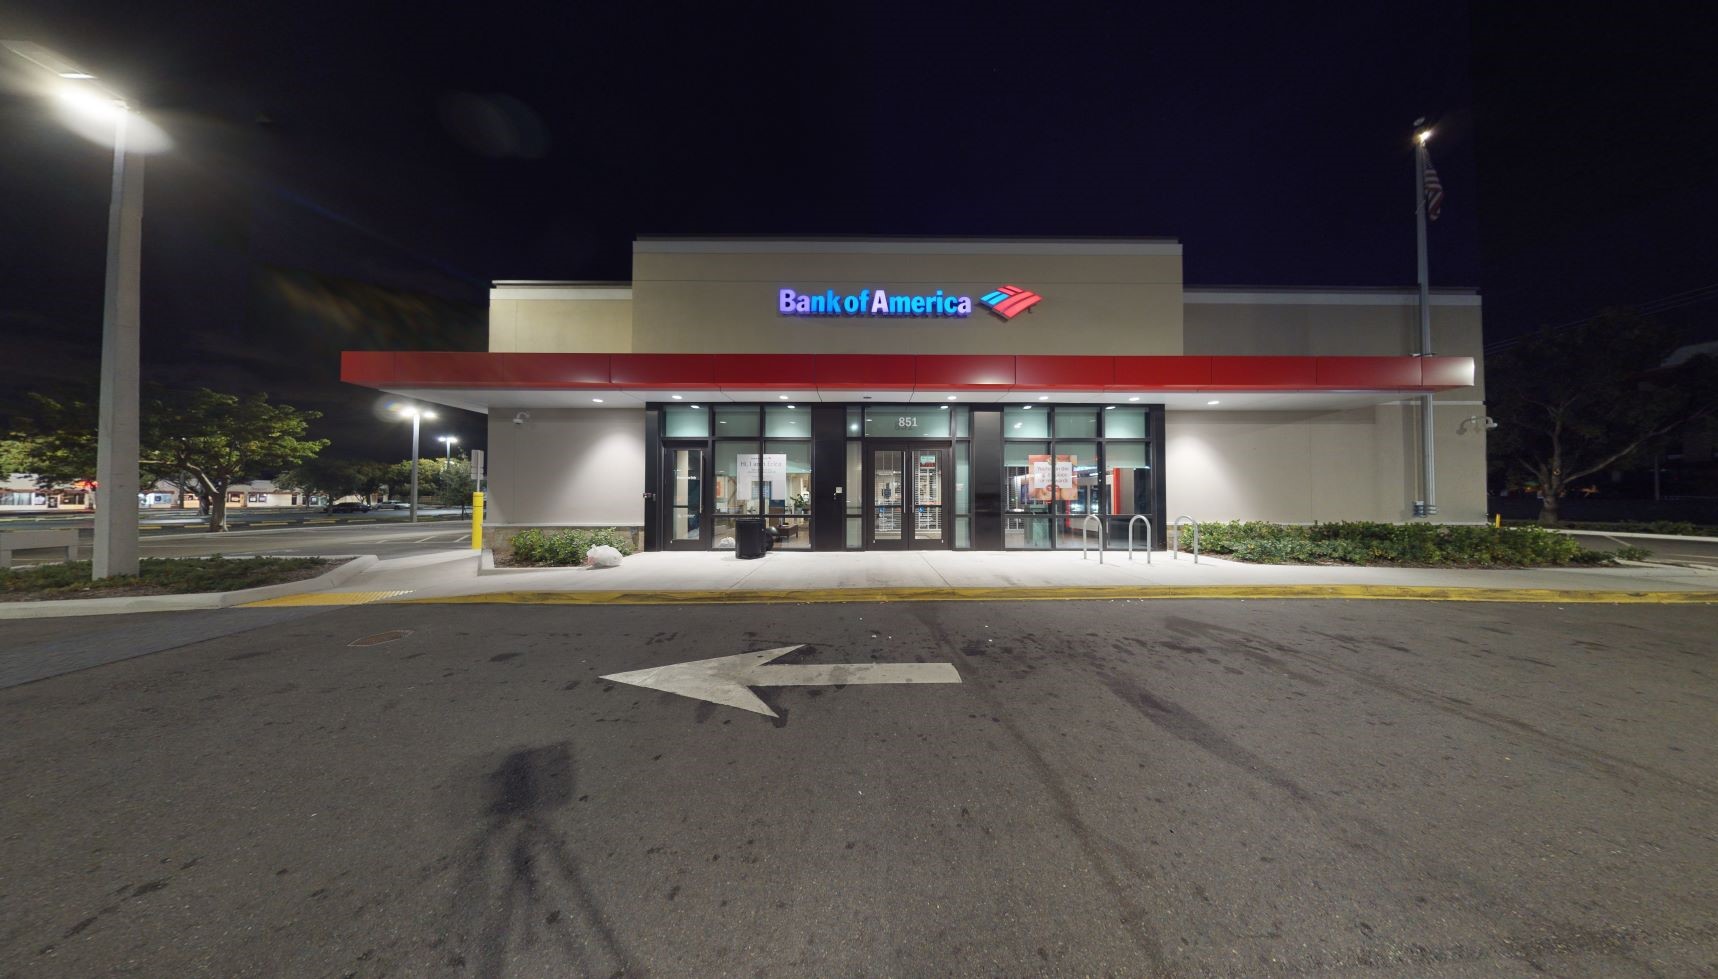 Bank of America financial center with drive-thru ATM | 851 S State Road 7, Hollywood, FL 33023